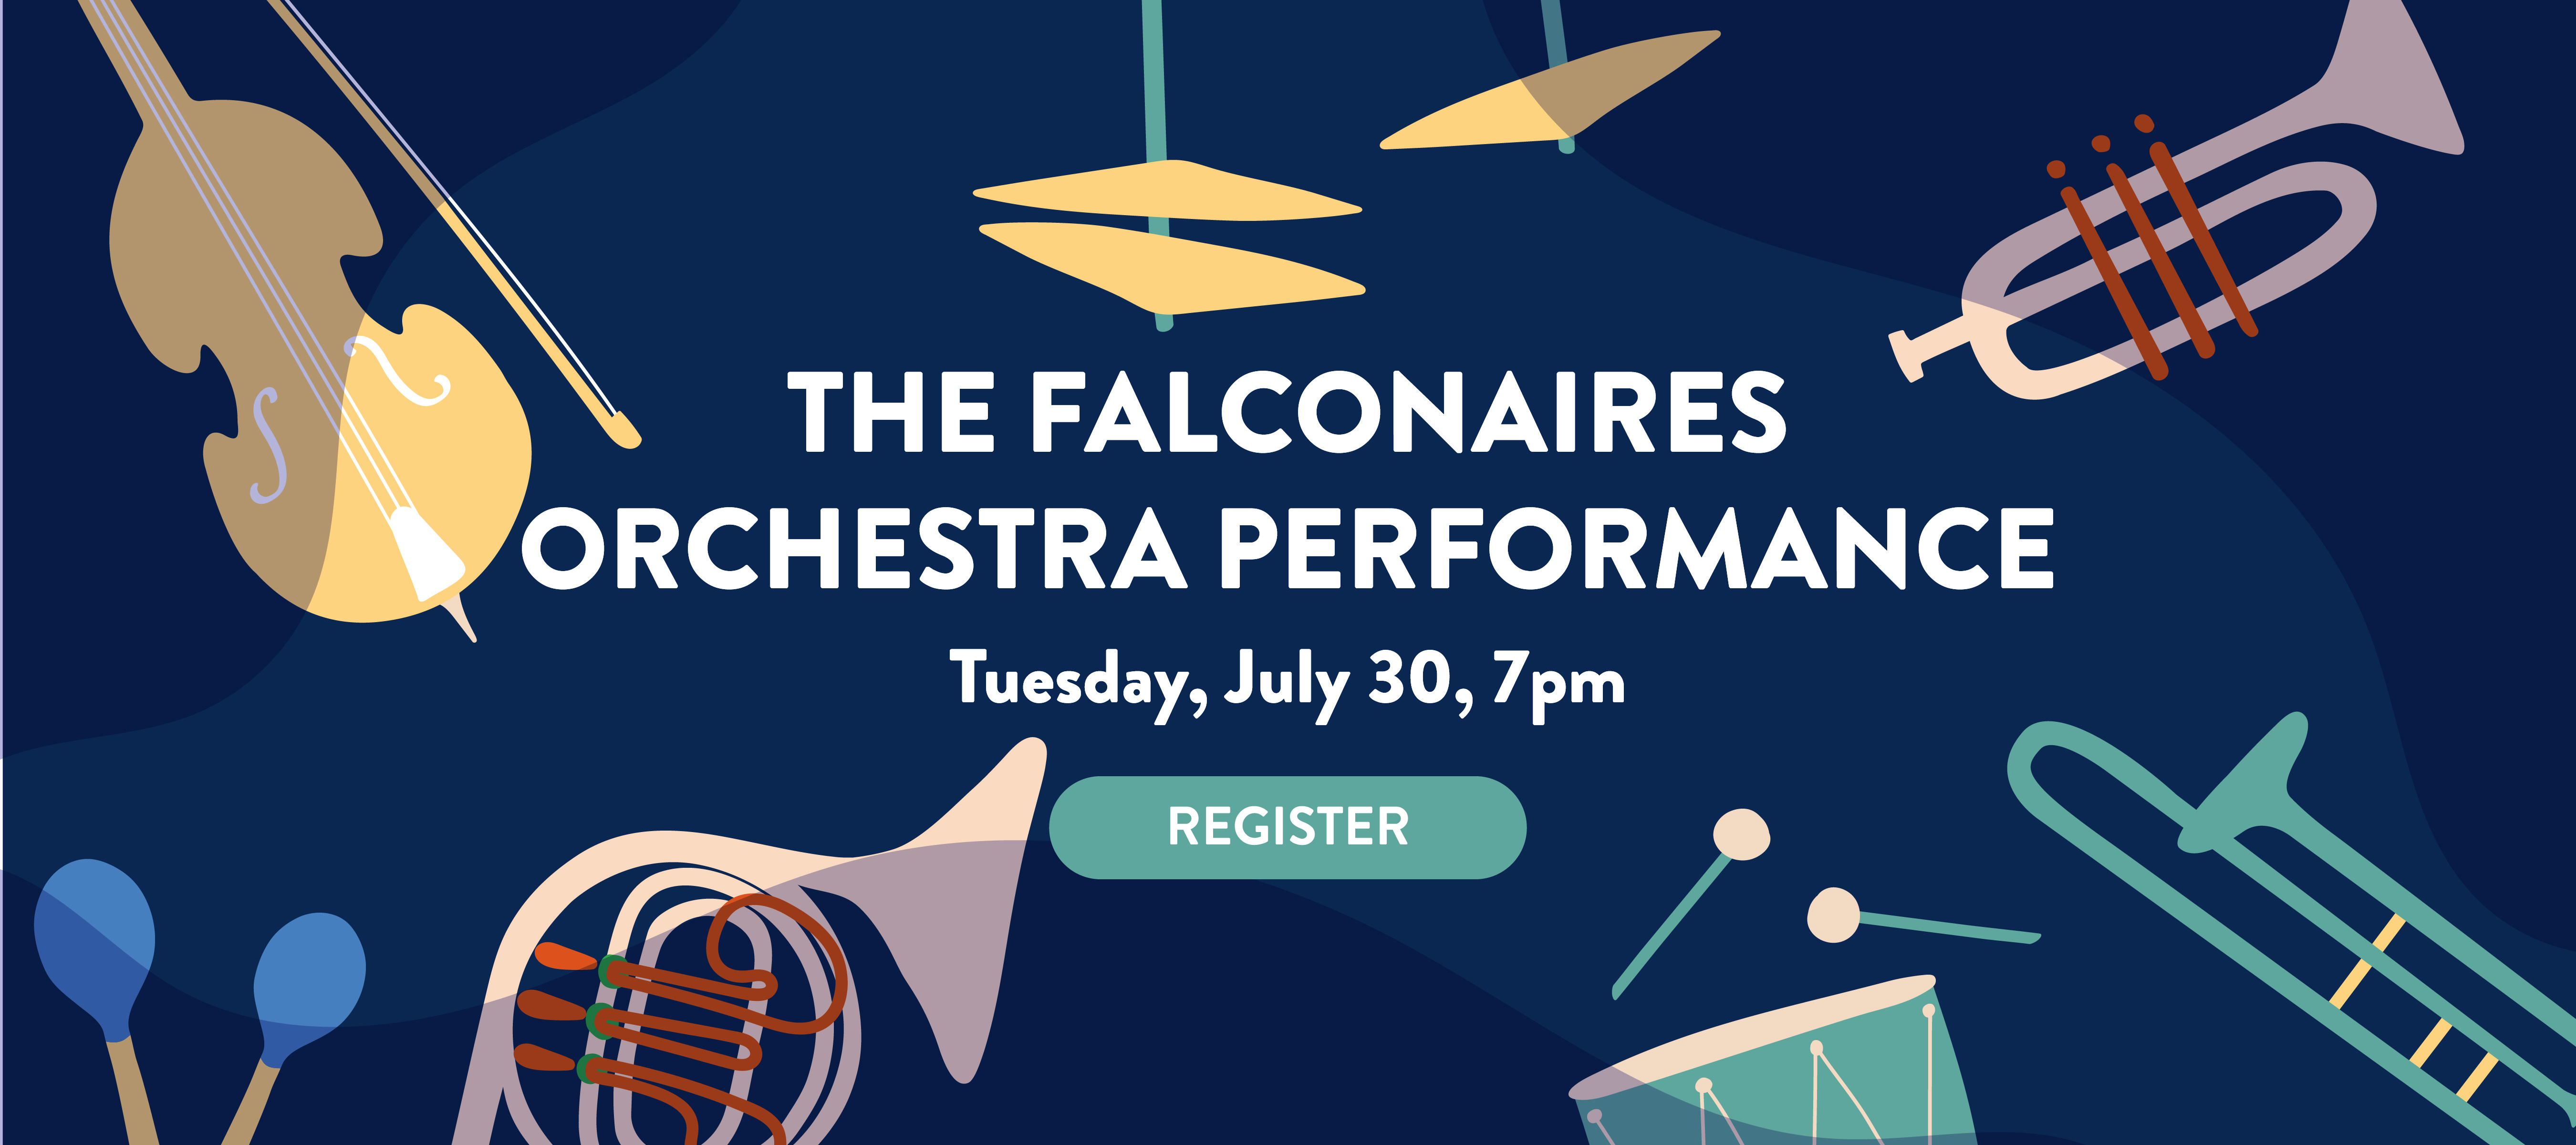 phpl, Prospect Heights Public Library, The Falconaires Orchestra Performance, live music, free show, enjoy classical music, Adult